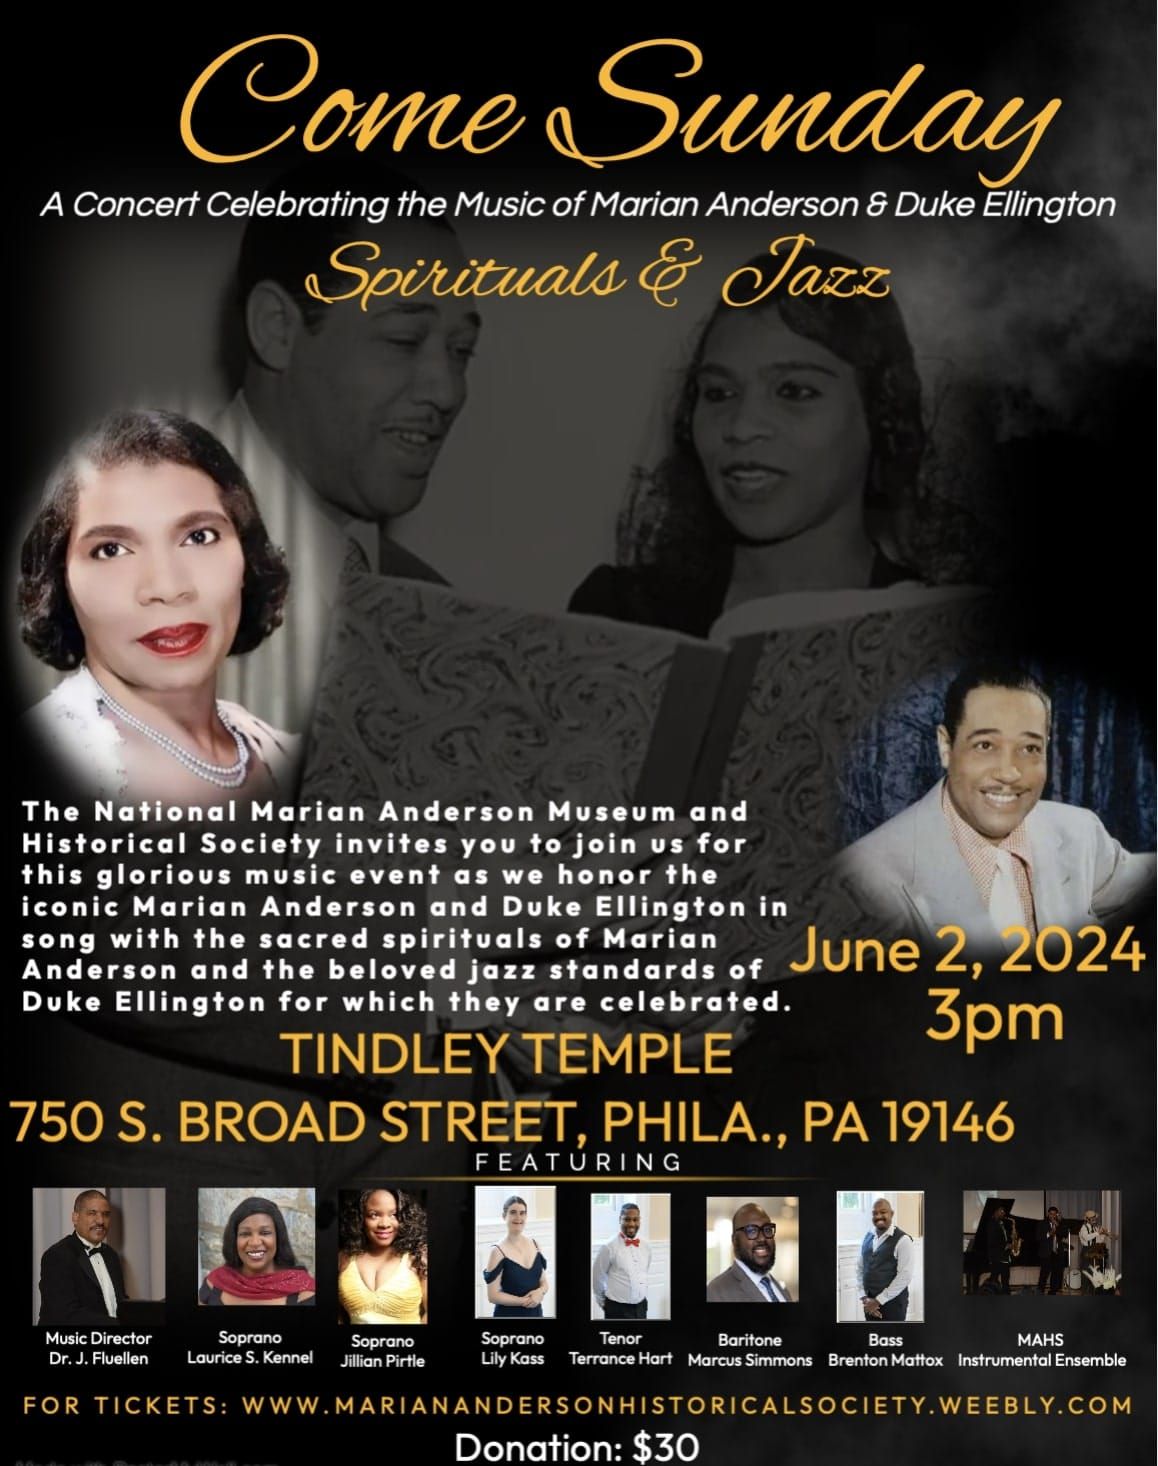 COME SUNDAY A TRIBUTE CONCERT OF SPIRITUALS AND JAZZ PRESENTED BY THE MARIAN ANDERSON MUSEUM 